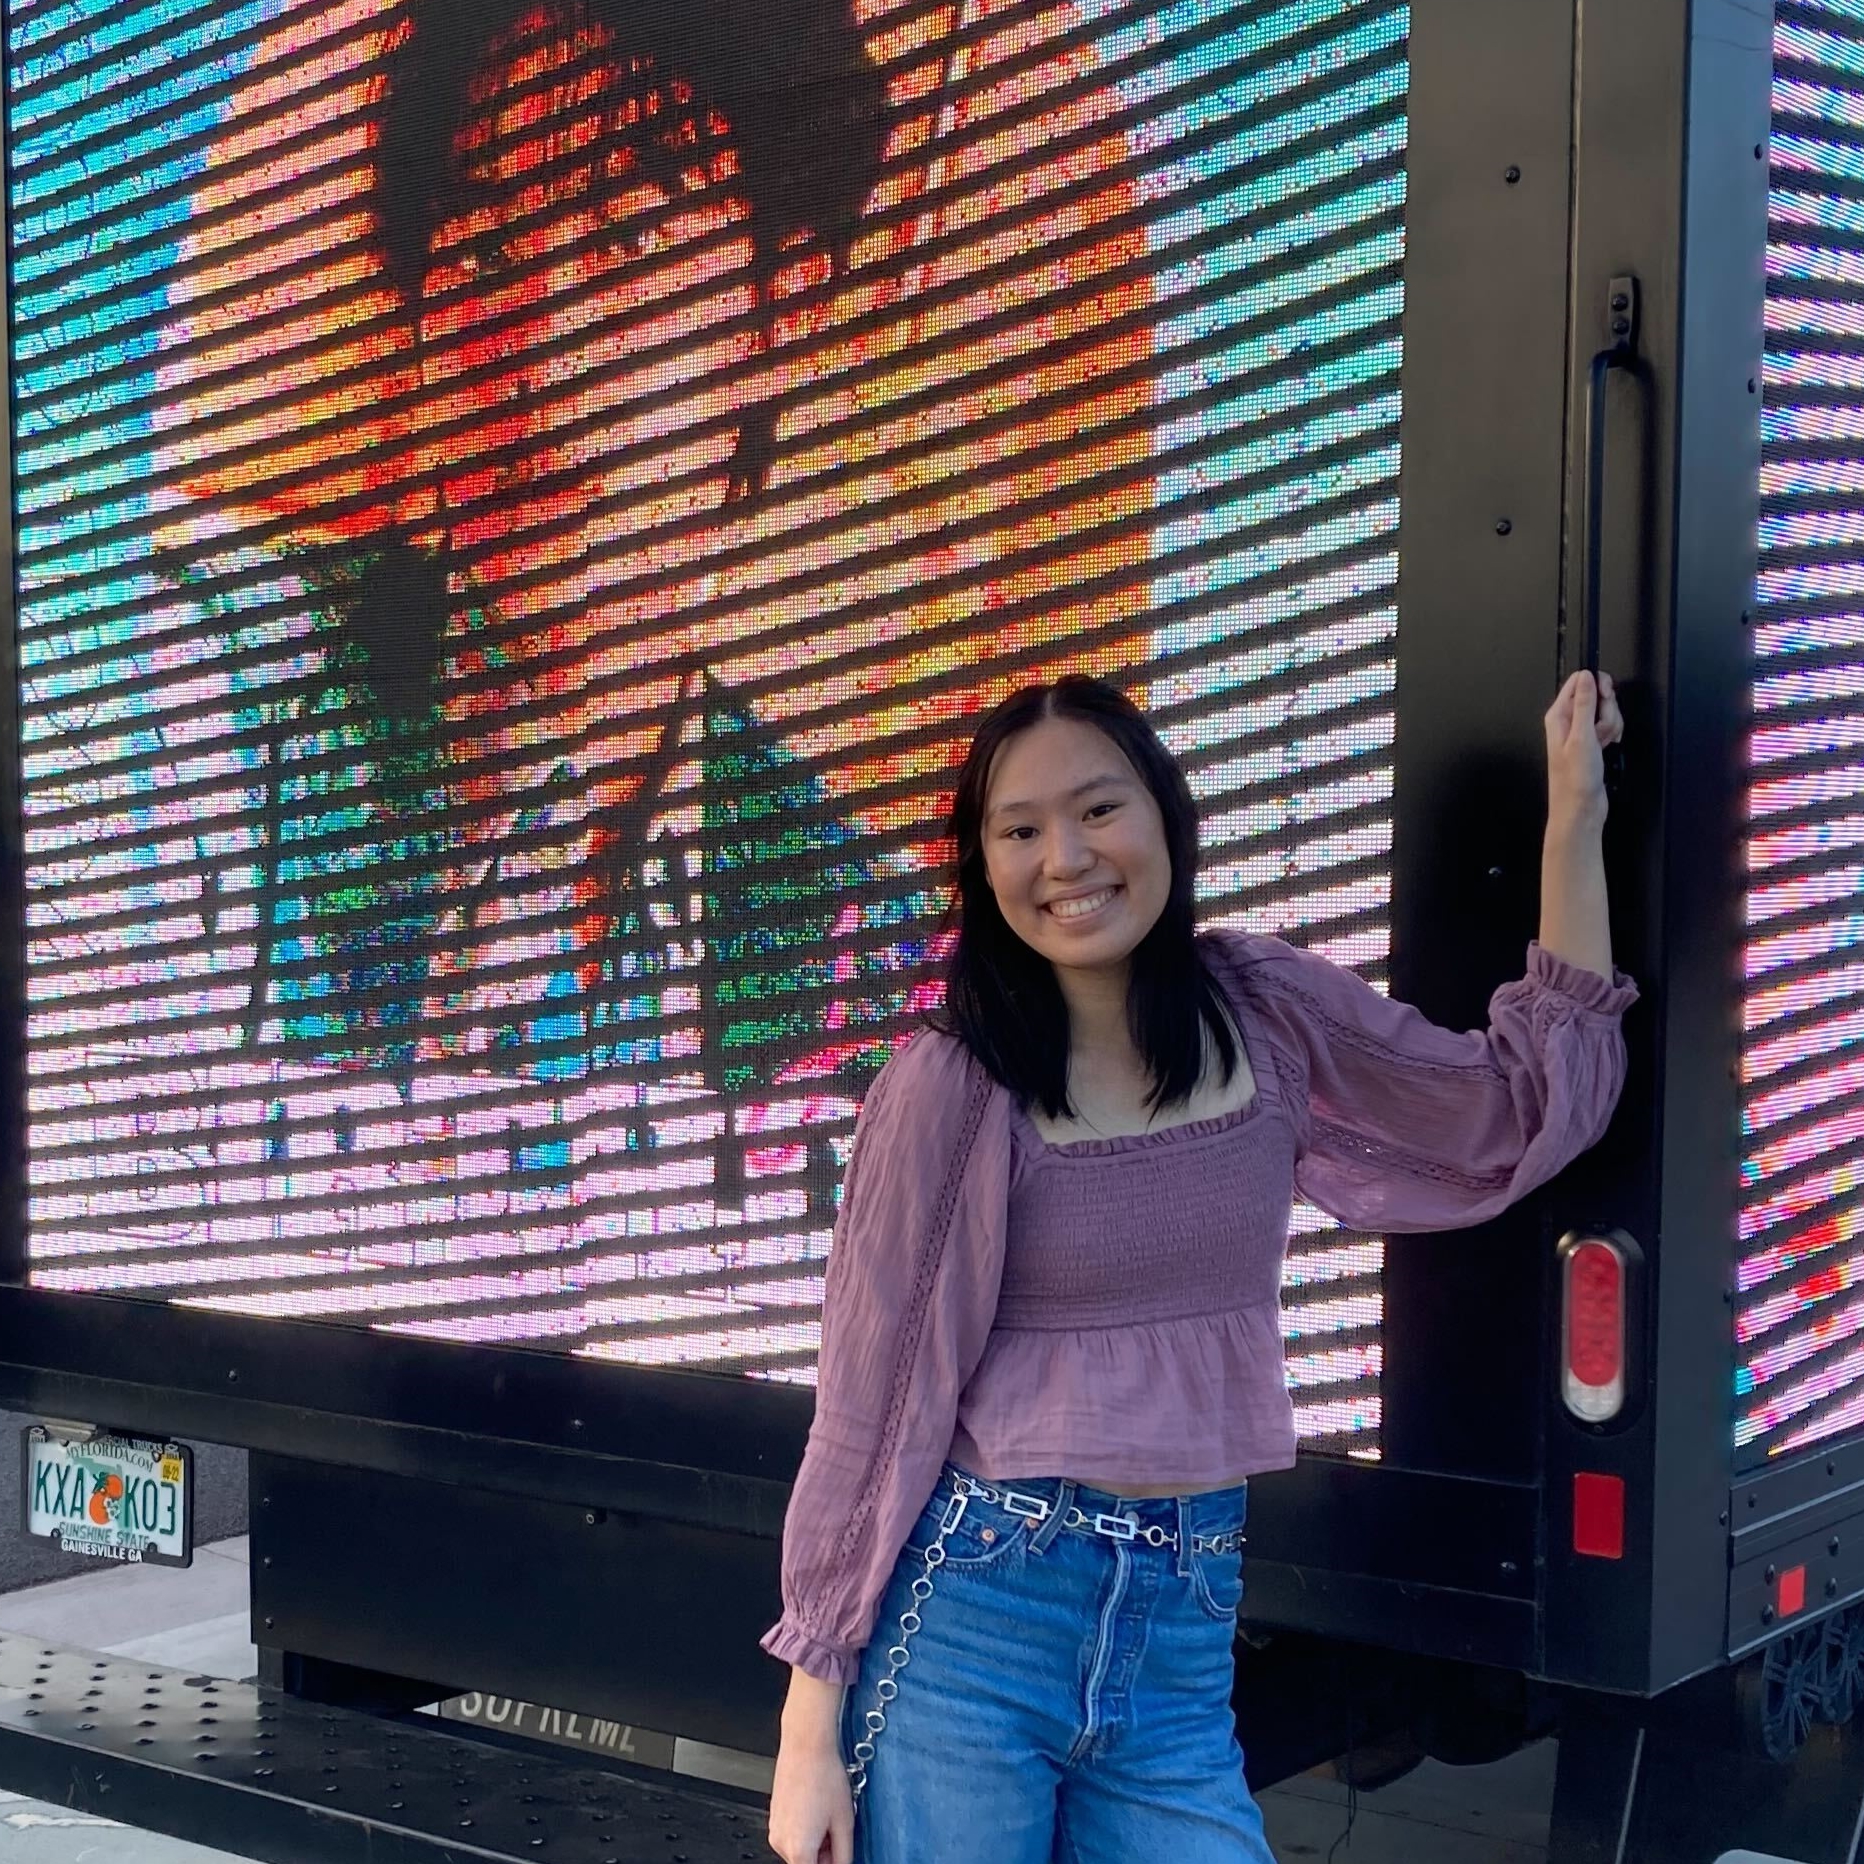 A young Asian woman smiles at the camera in front of a truck with a celebrity painted on it.